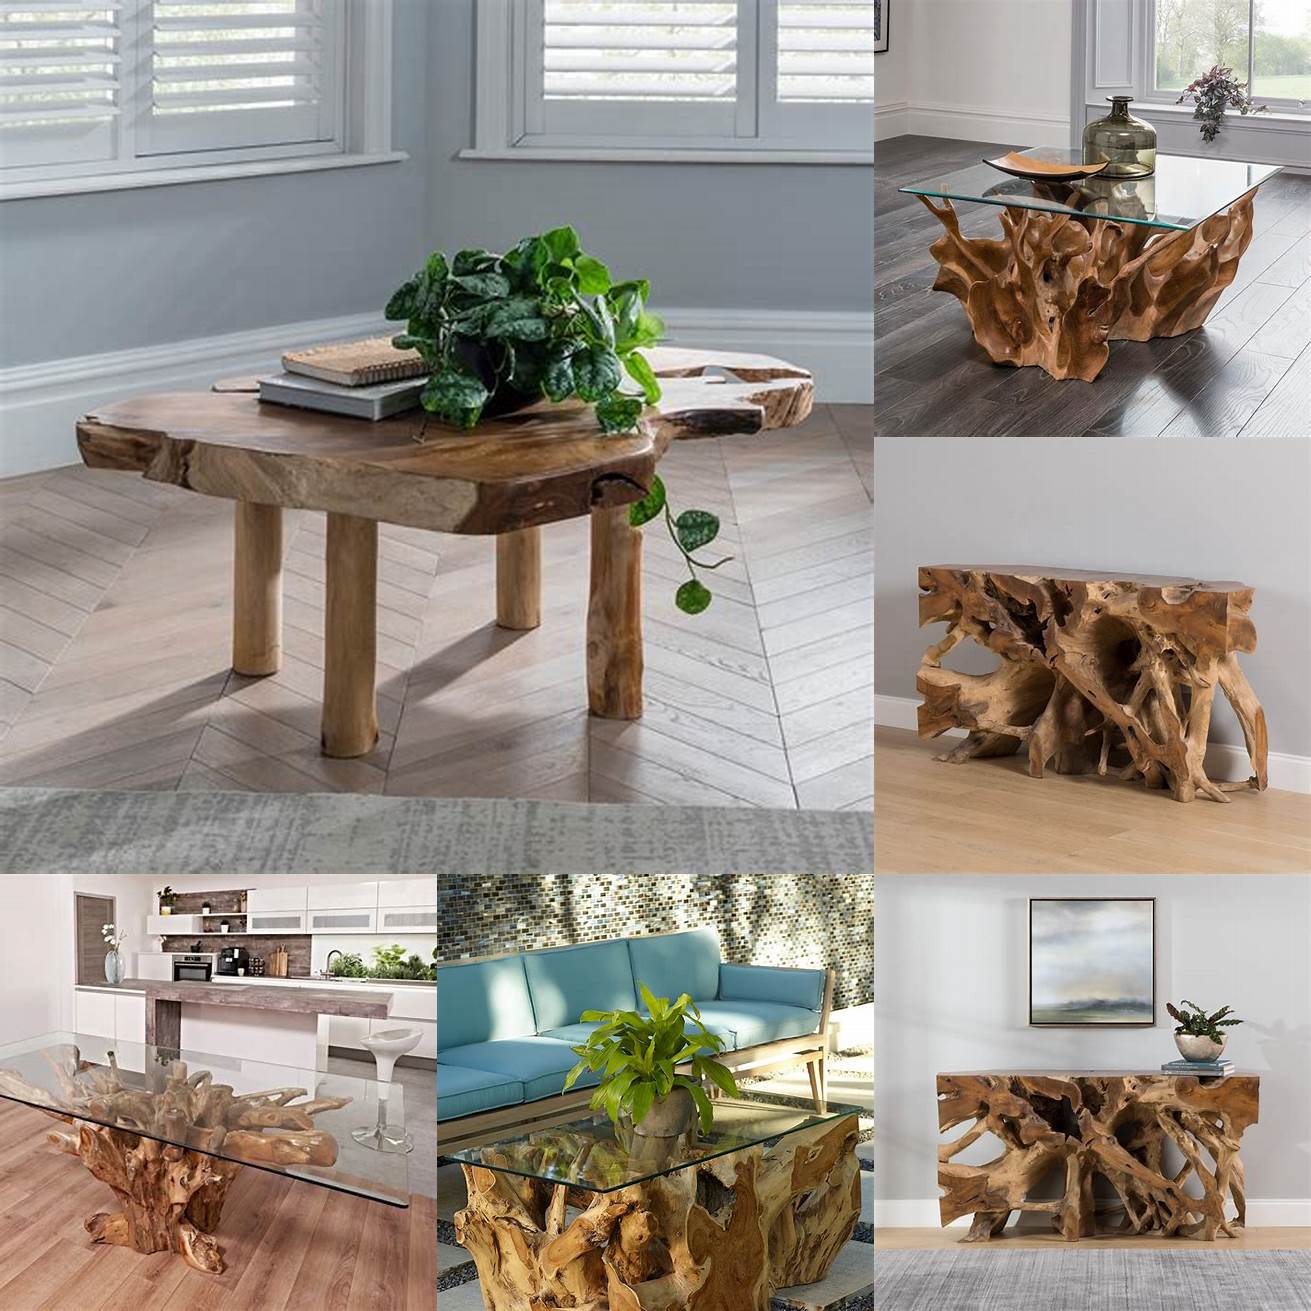 A Teak Root Table in a Living Room